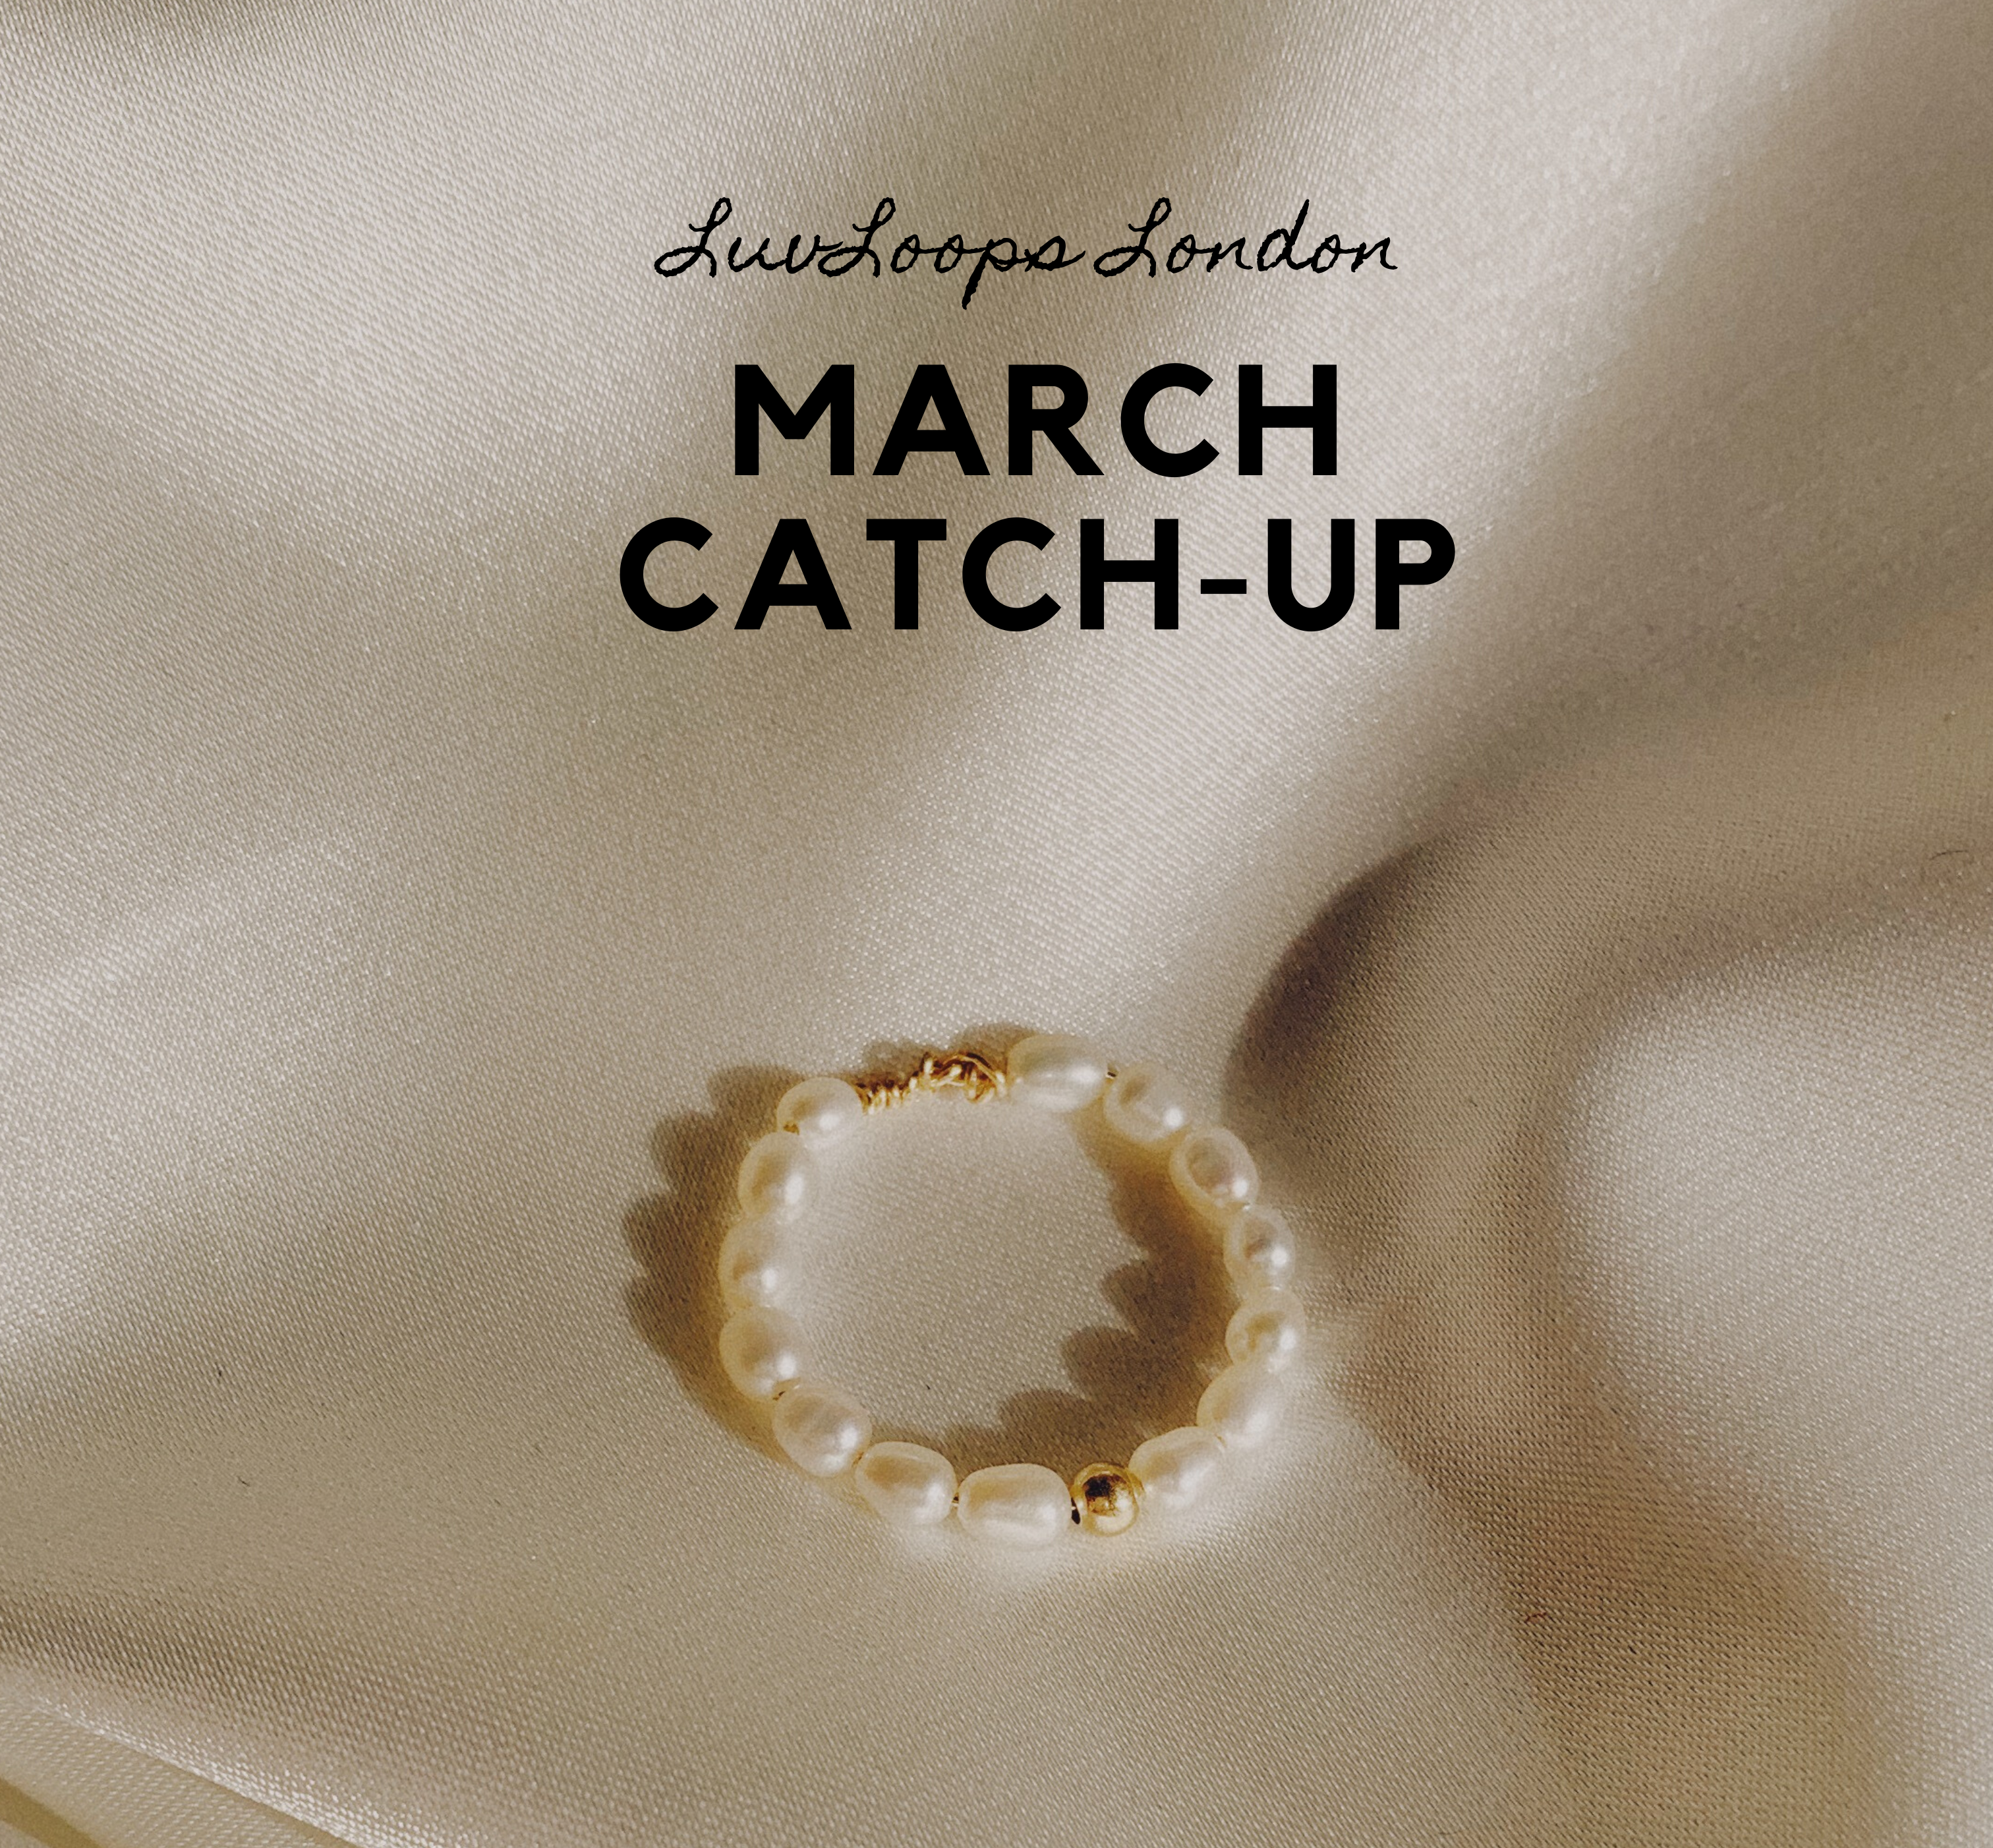 MARCH CATCH-UP AT LUVLOOPS